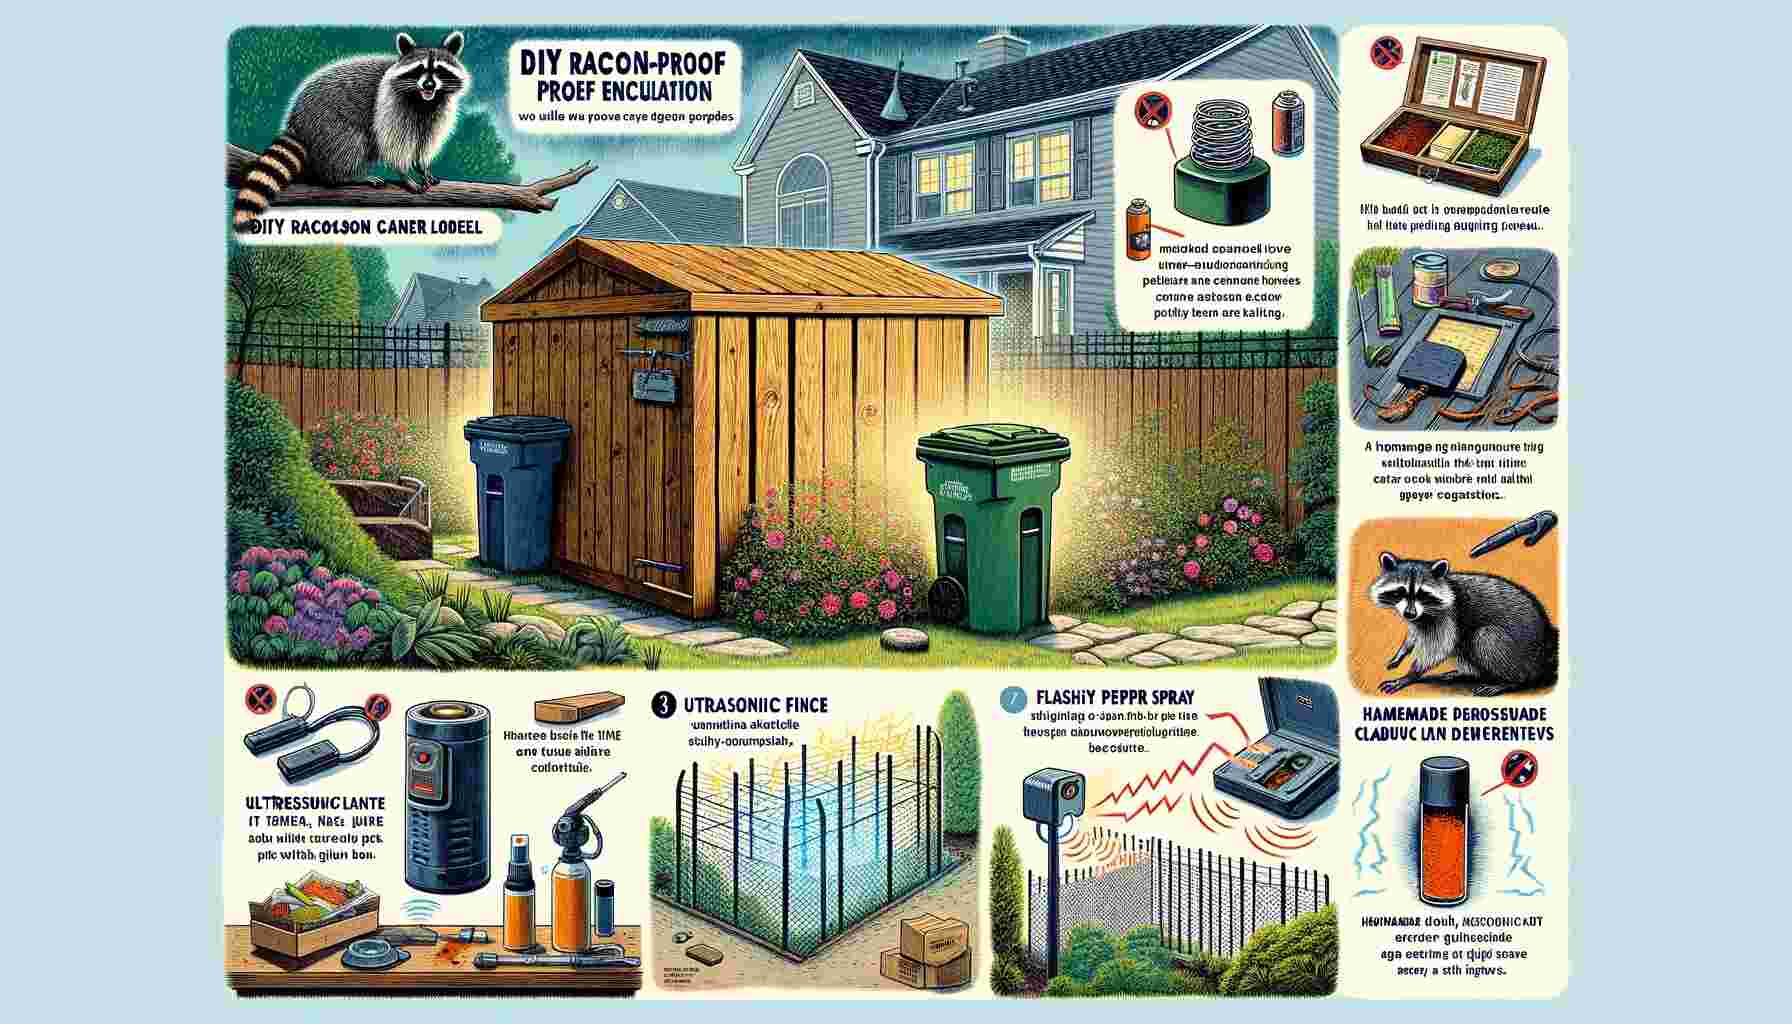 The image illustrates various DIY raccoon-proof enclosures and deterrents, showcasing homemade solutions like a raccoon-proof garbage can enclosure, a homemade electric fence, and natural deterrents set against the backdrop of a suburban home.